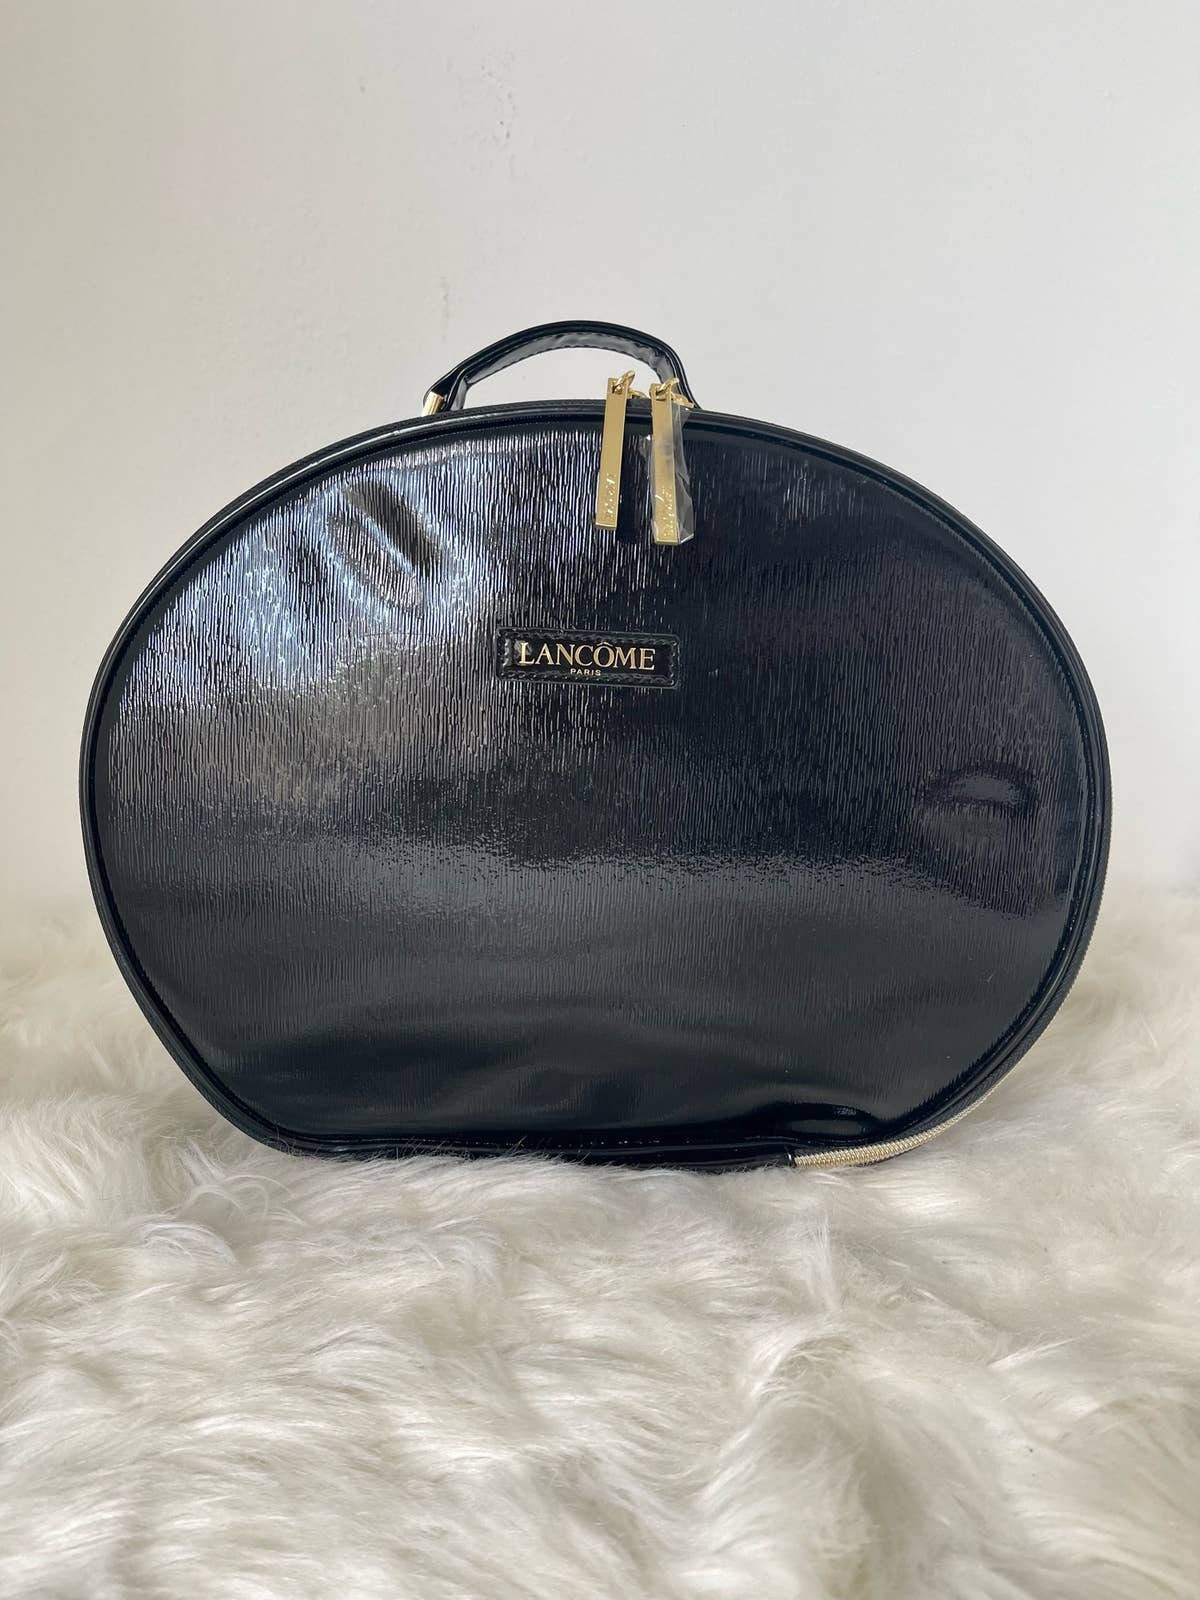 NEW Lancôme Black Patent Leather Round Handle Cosmetic Bag 